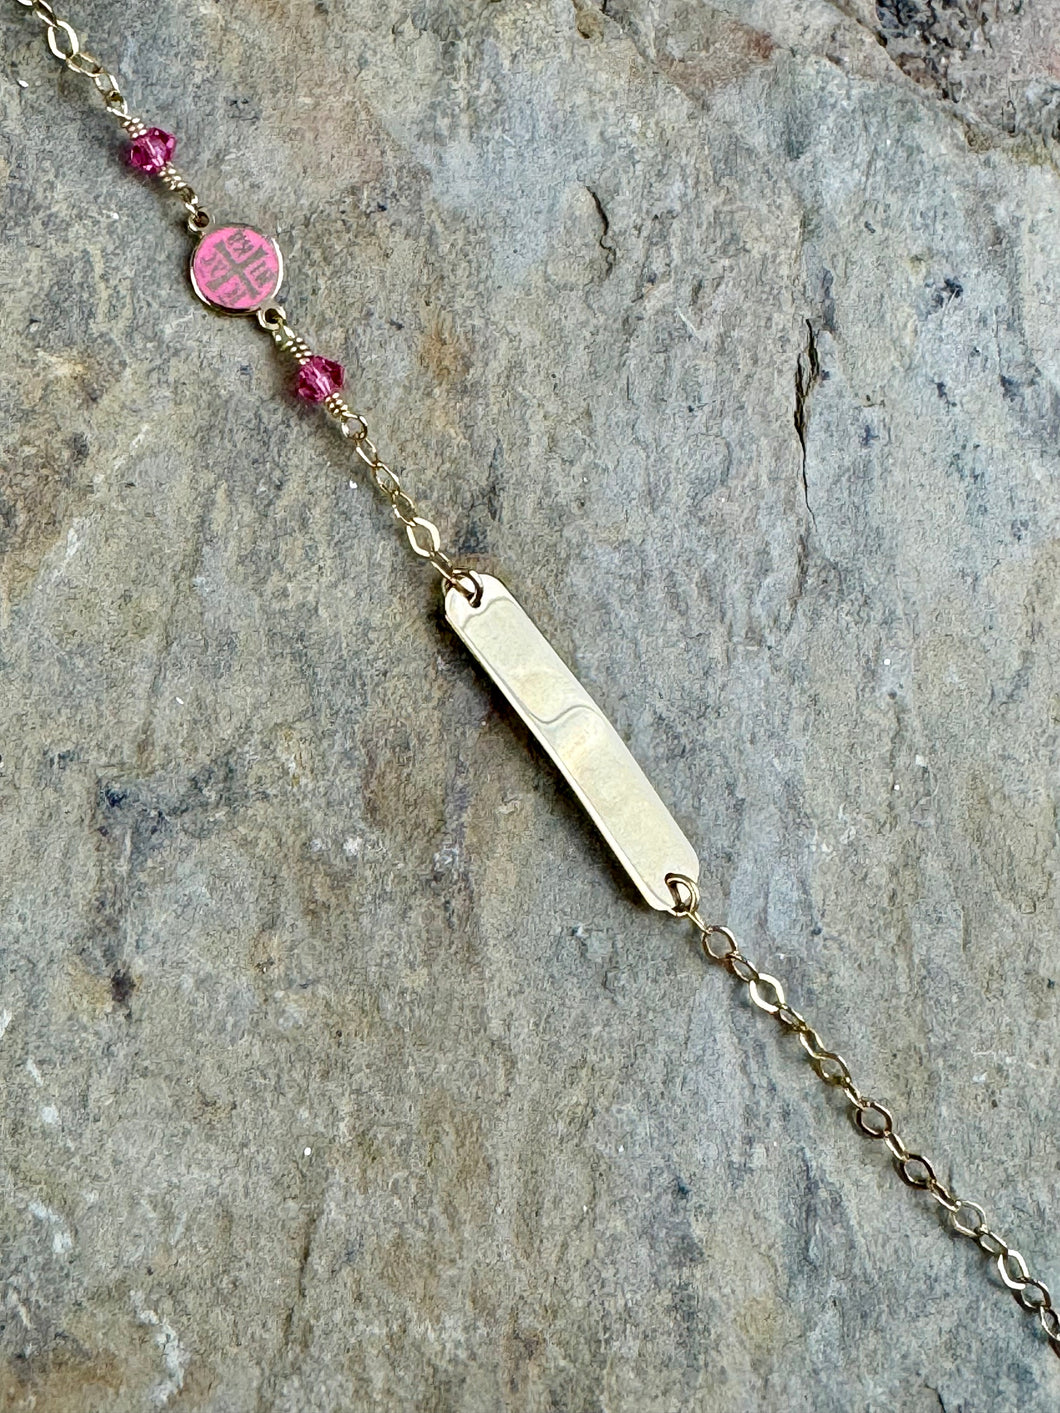 14K Yellow Gold I.D Bracelet with Pink Beads and Konstantinato GCB14